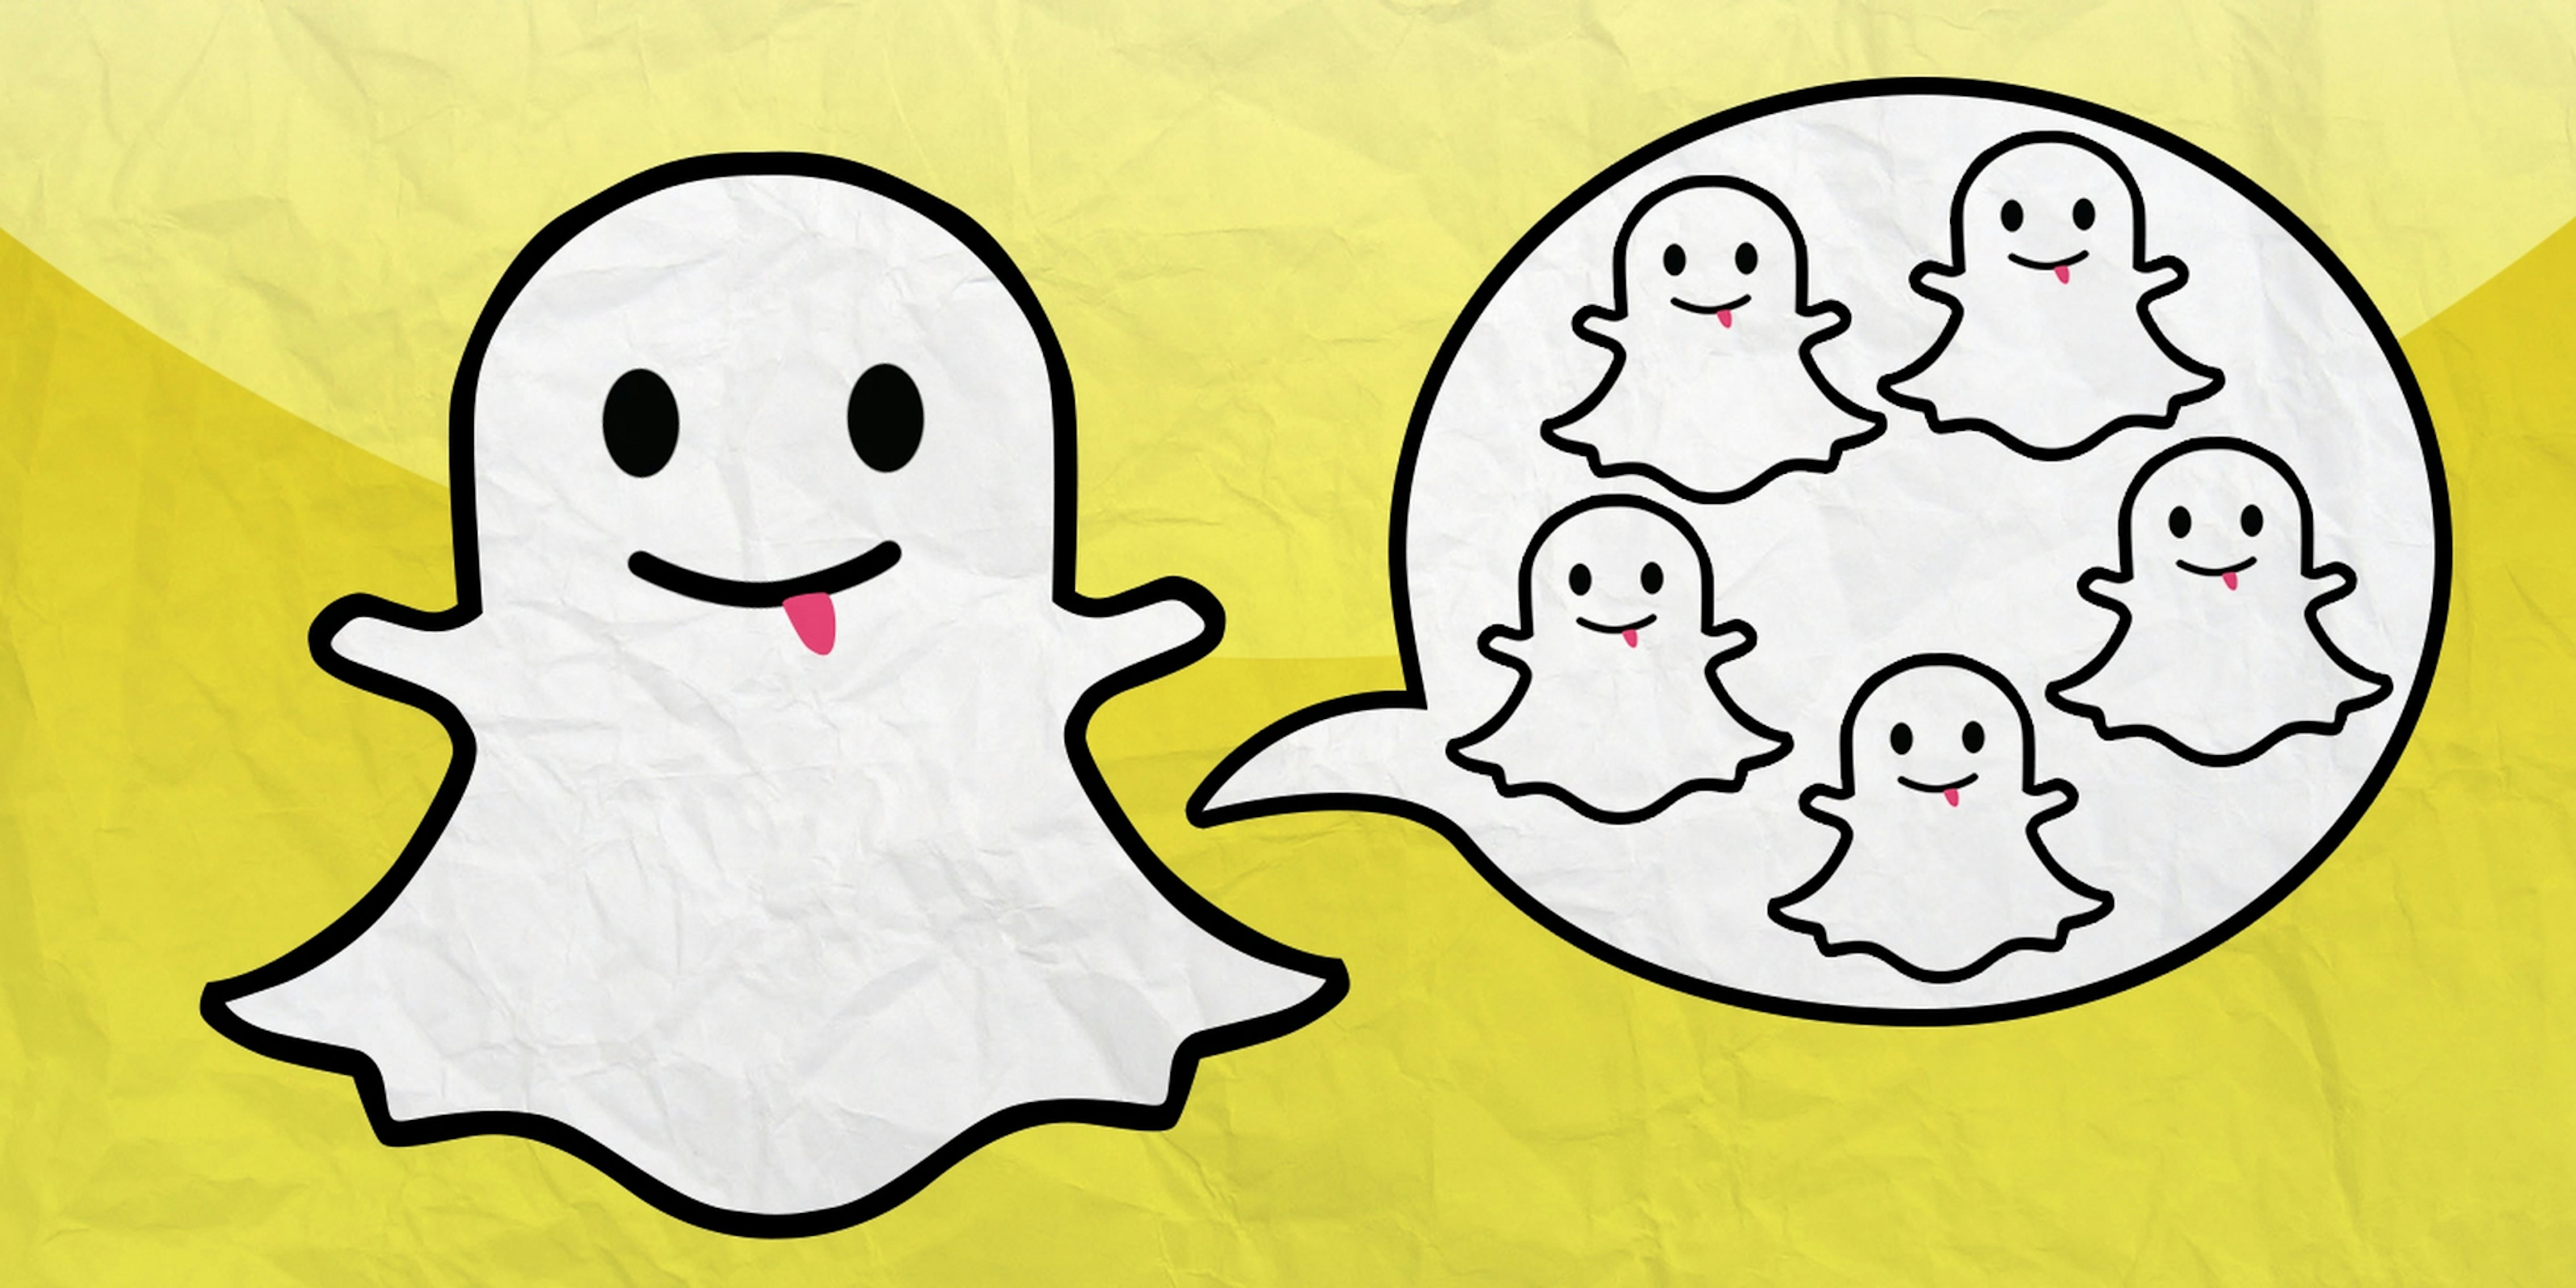 How to use Snapchat: An illustration for Snapchat groups